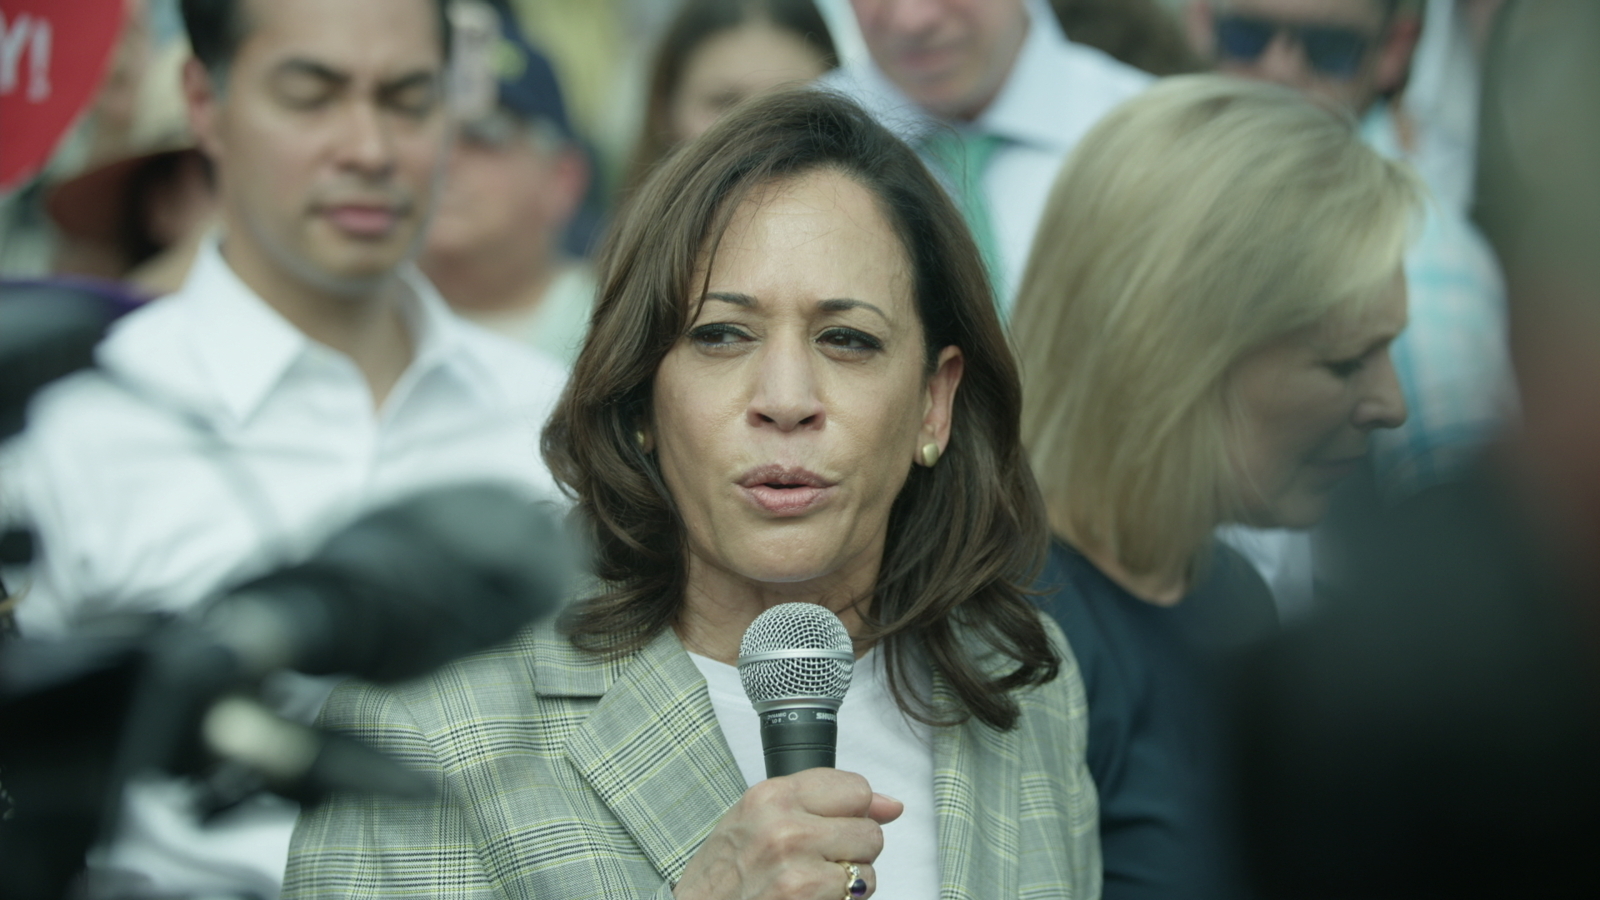 Targeting Voters Democratic Kamala Harris talking to an audience using a microphone